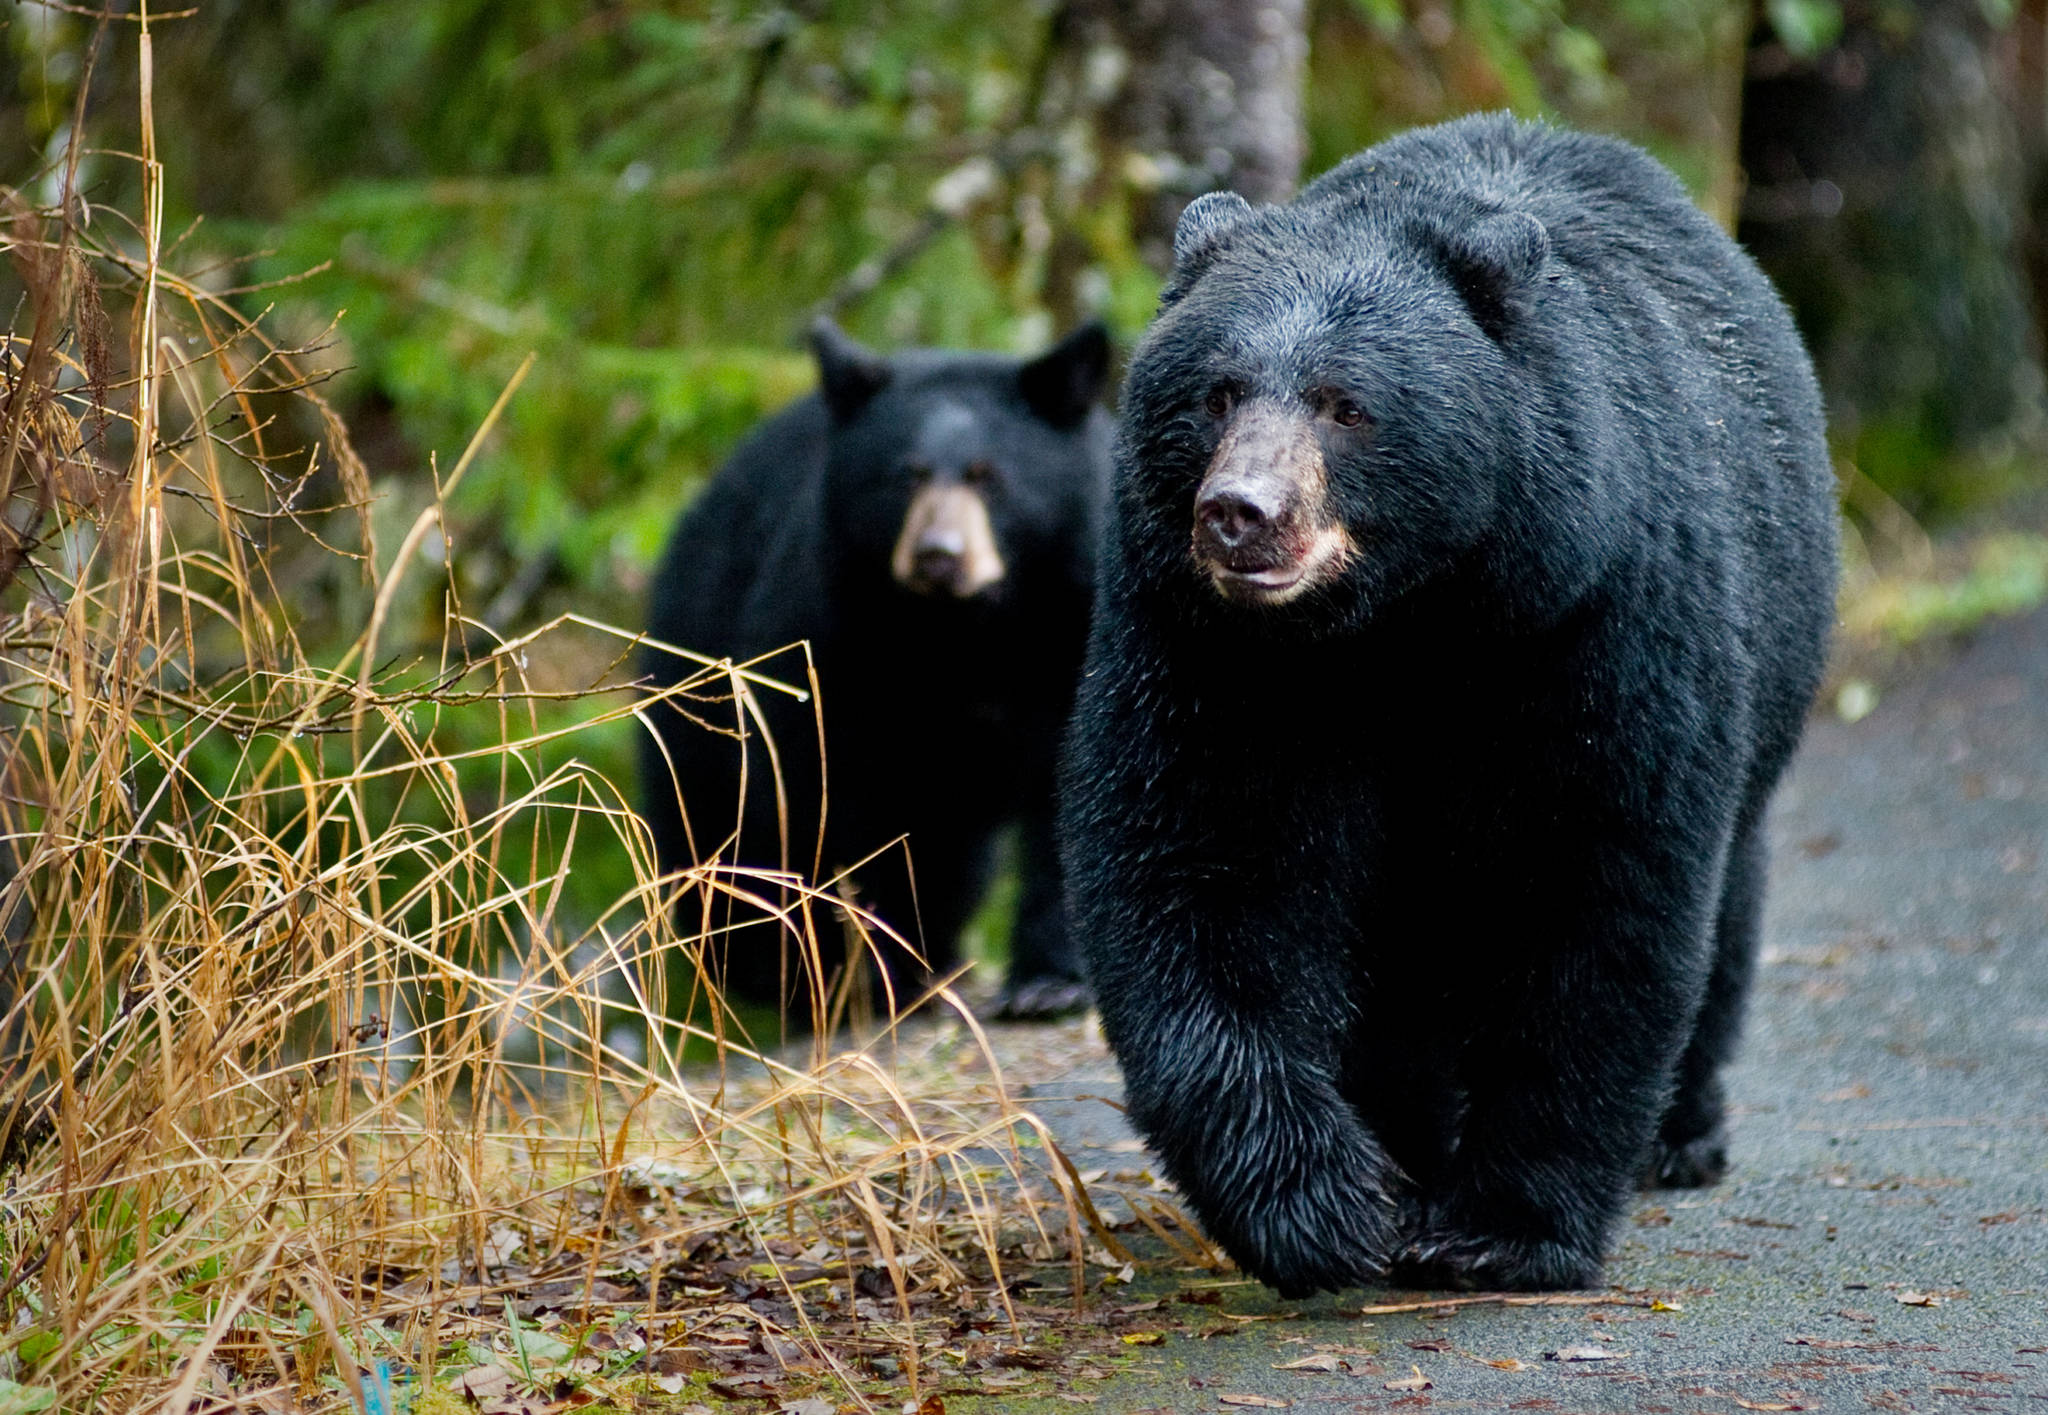 Michael Penn | Juneau Empire File                                 A black bear sow and her cub walk along the Trail of Time at the Mendenhall Glacier Visitor Center. A lack of visitors to the area this year may have emboldened bears to explore surrounding areas, local experts said, although it’s hard to know for sure.